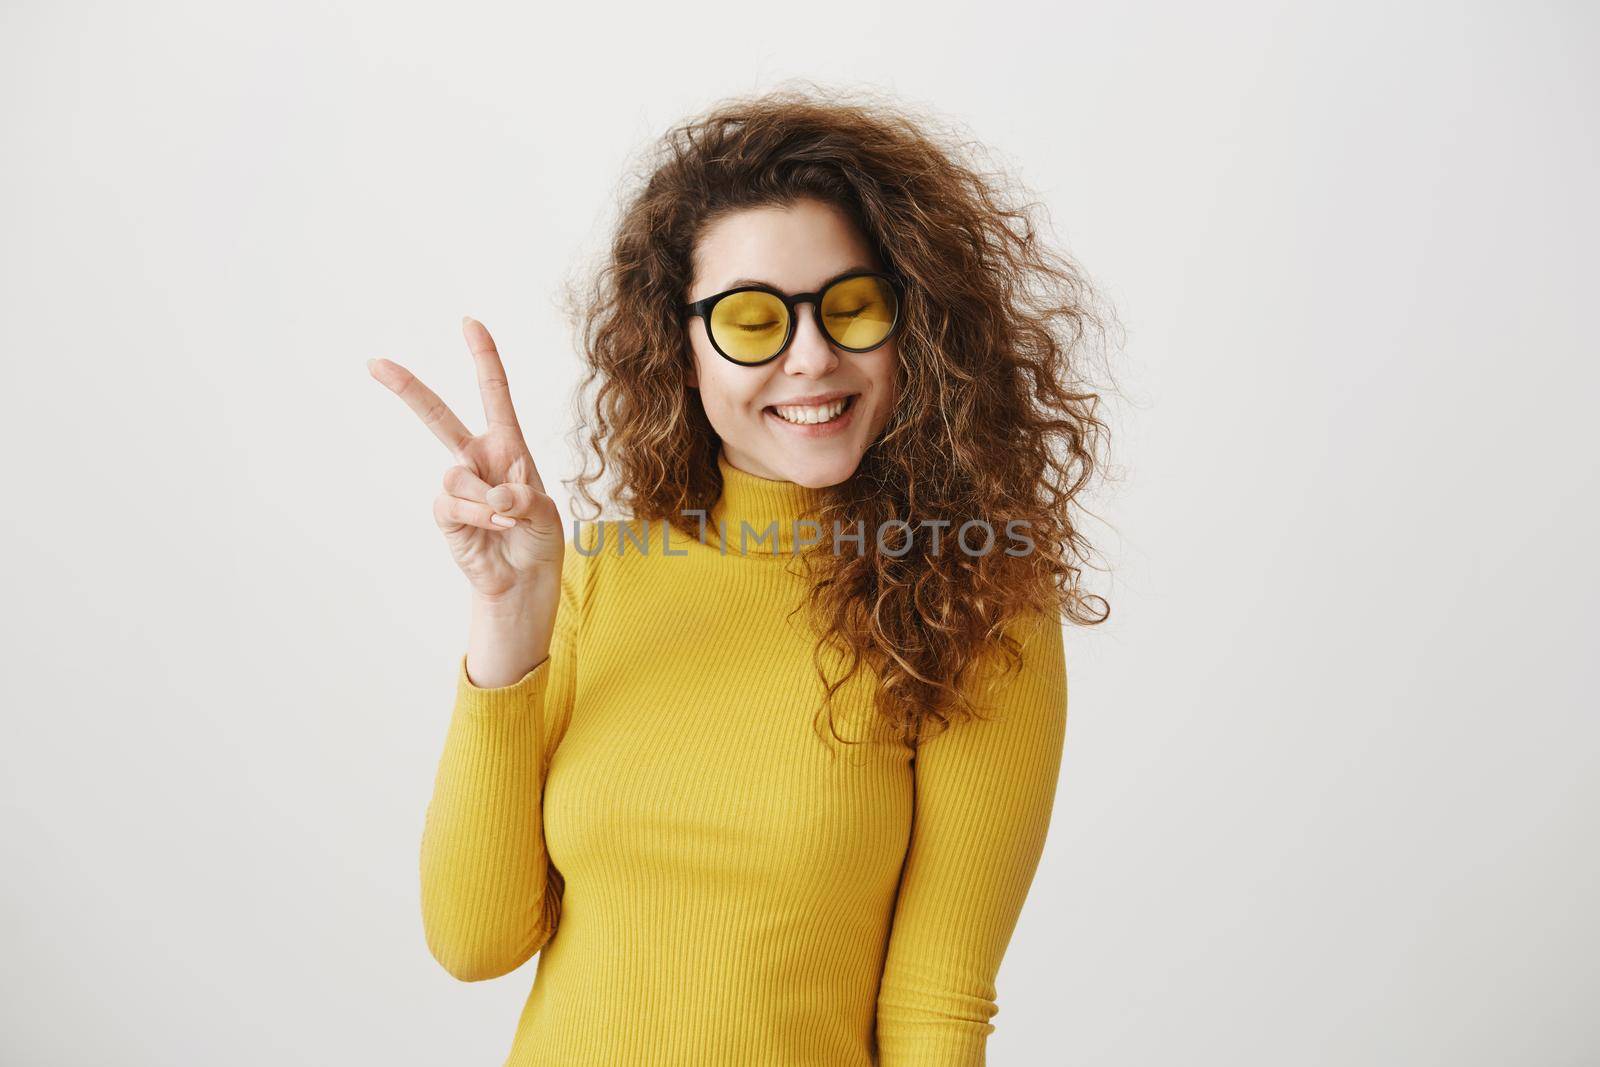 Portrait of cheerful young woman showing two fingers or victory gesture, over grey background